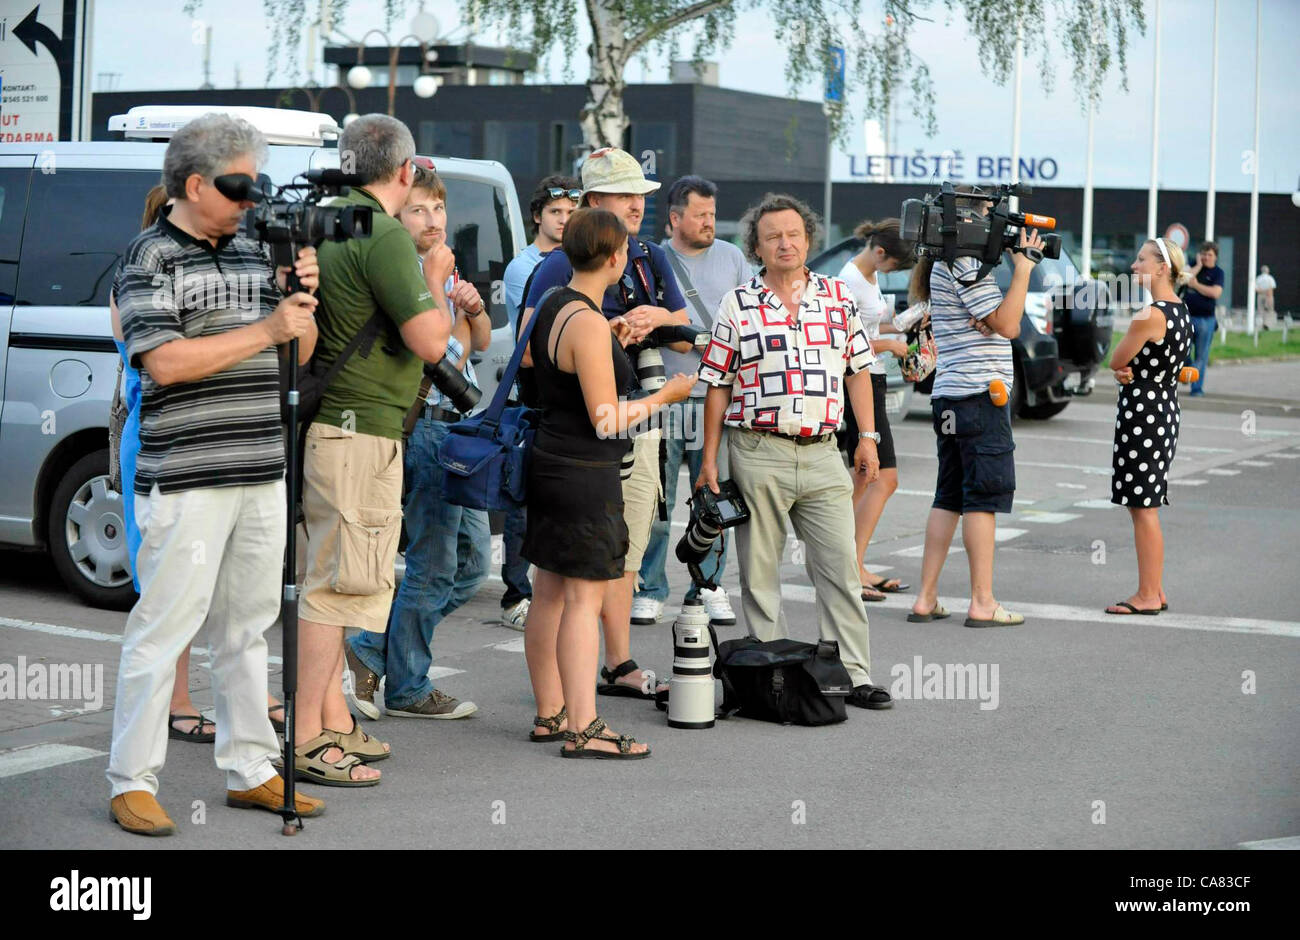 Journalists wait for the the Airplane of the Czech Air Force with the Czech tourists who crashed with the bus in Croatia, landed in Brno, Czech Republic shortly before 8 PM on June 24, 2012. The bus with Czech tourists crashed near Gospic, Croatia, Saturday, June 23, 2012. Eight tourists were killed and 51 injured in a bus crash on a major highway in Croatia early Saturday, police said. The accident happened some 200 kilometers (124 miles) south of Zagreb, on the highway connecting the Croatian capital with the central Adriatic coastal city of Split. (CTK Photo/Vaclav Salek) Stock Photo